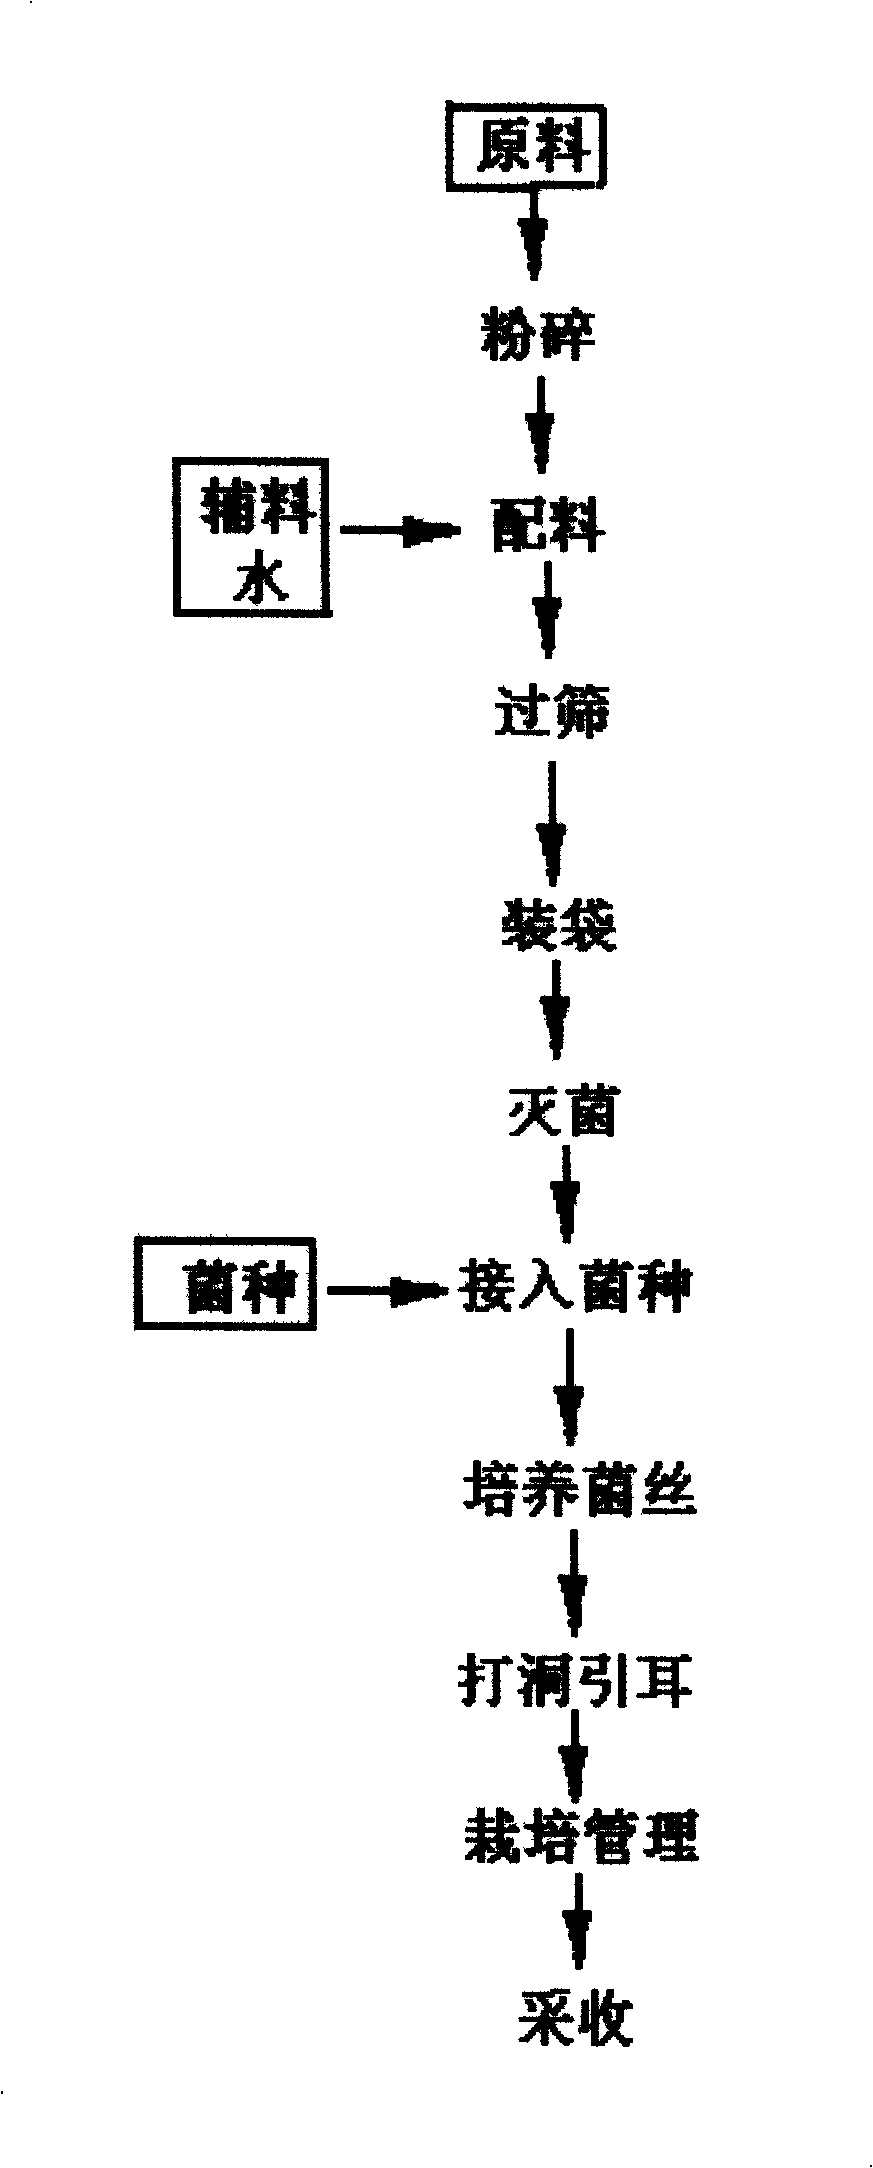 Method for cultivating black edible fungus using kailyard stalk